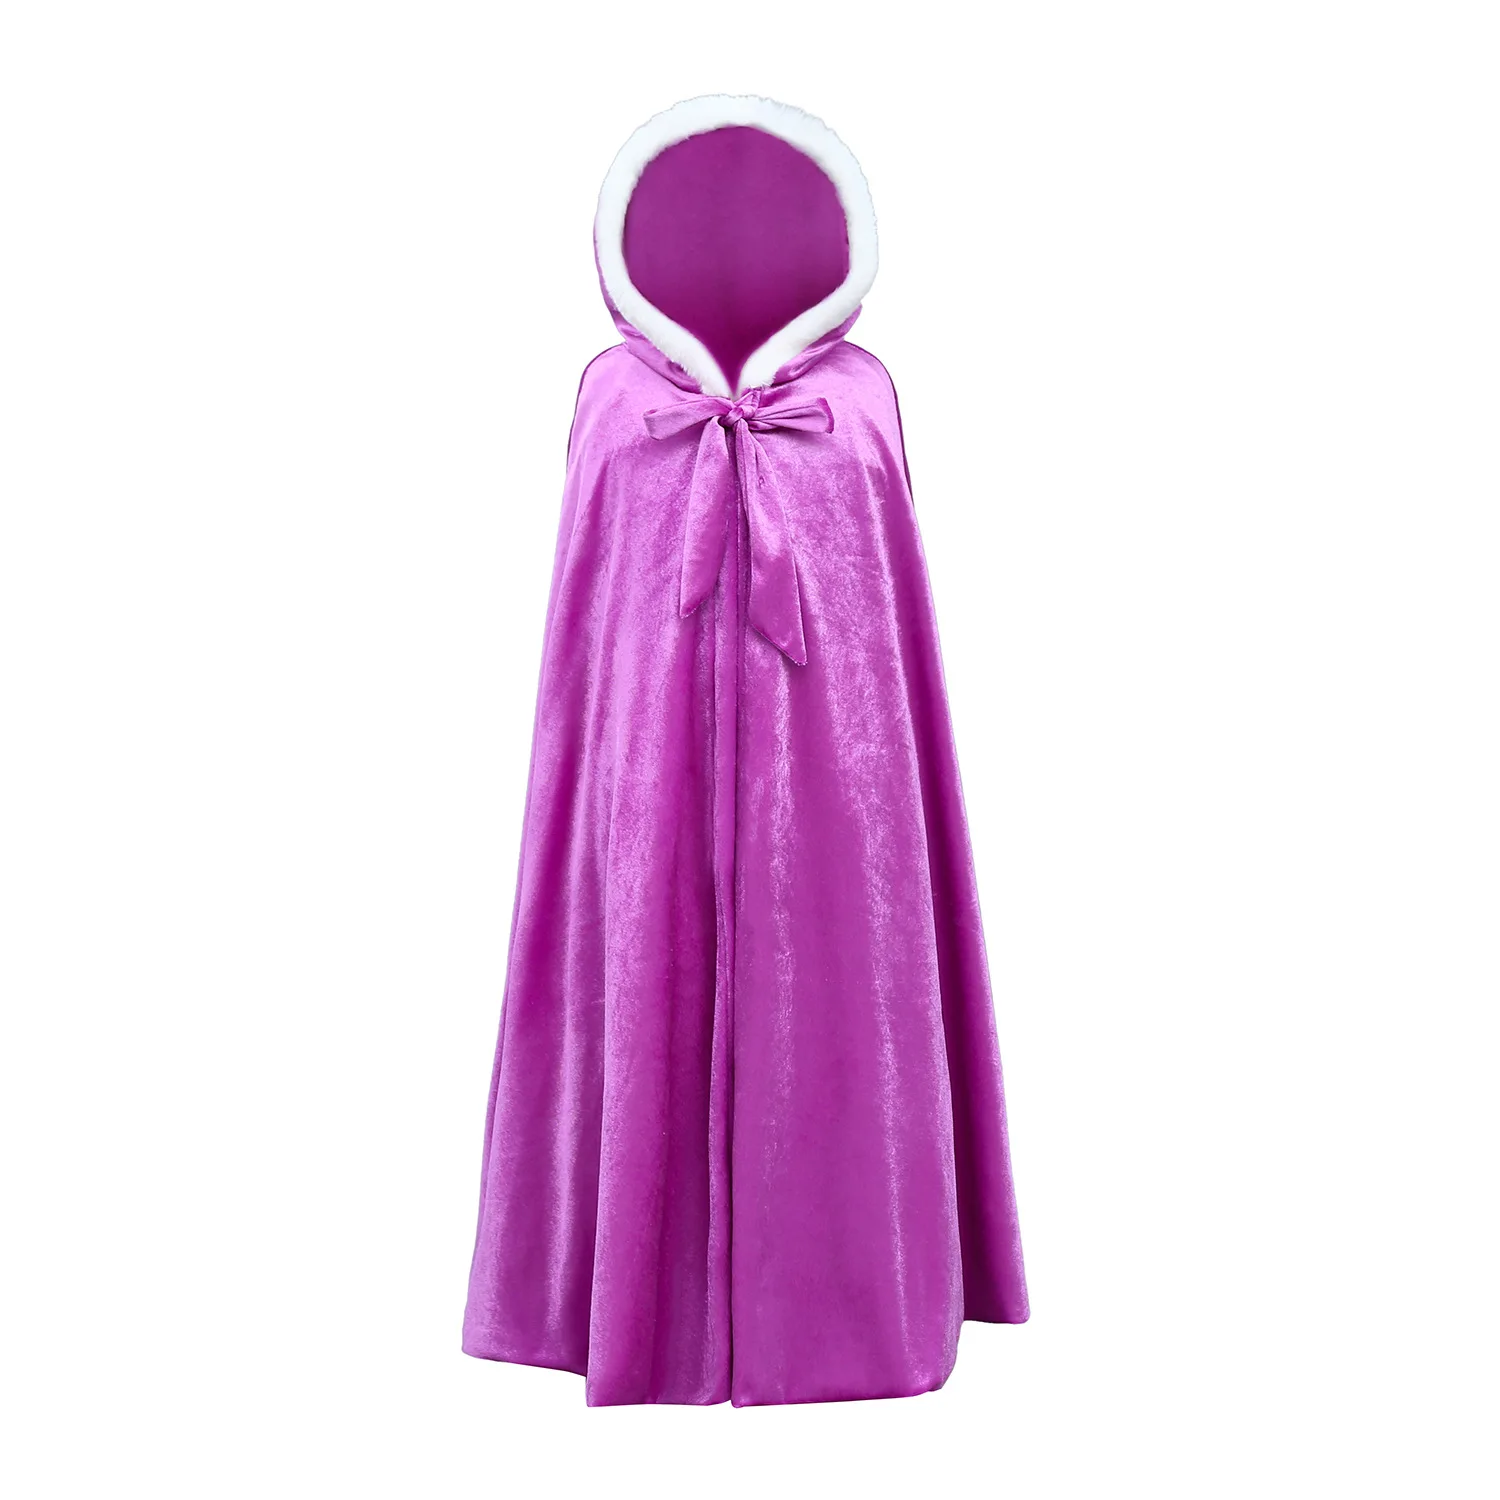 Birthday Halloween Cosplay for 2-10 Years Girls Dress Up Almce Fur Princess Hooded Cape Cloaks Costume 